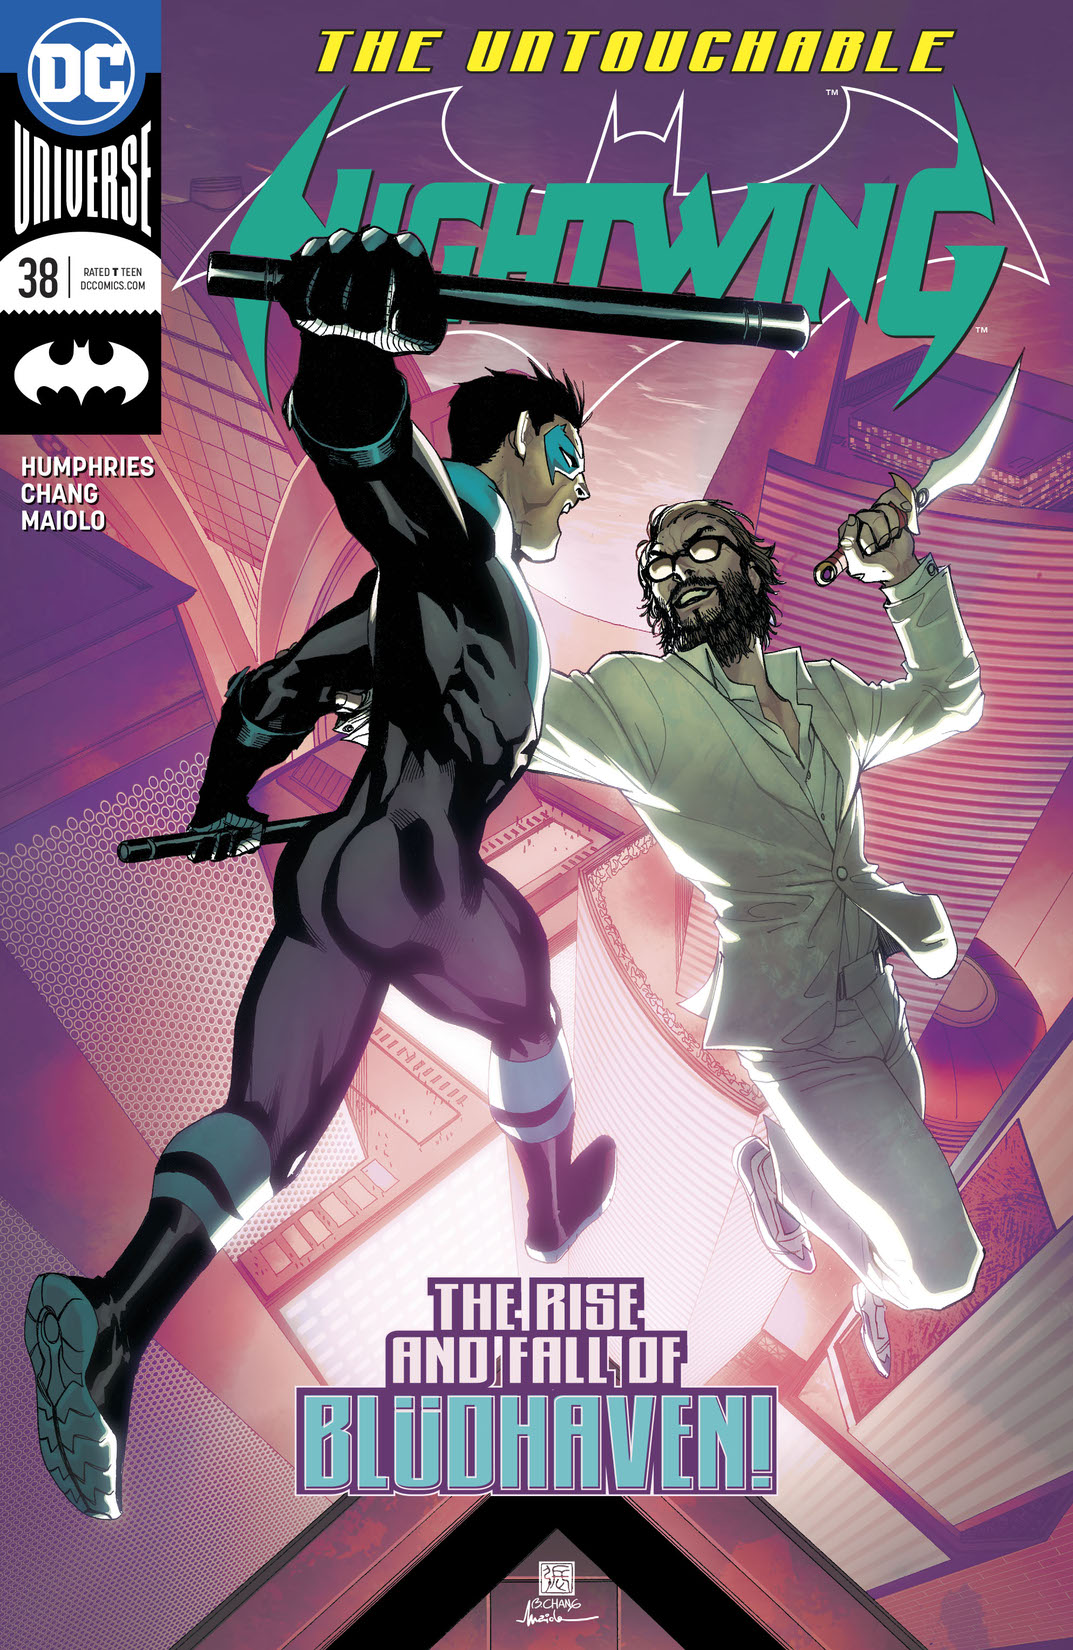 Nightwing (2016-) #38 preview images